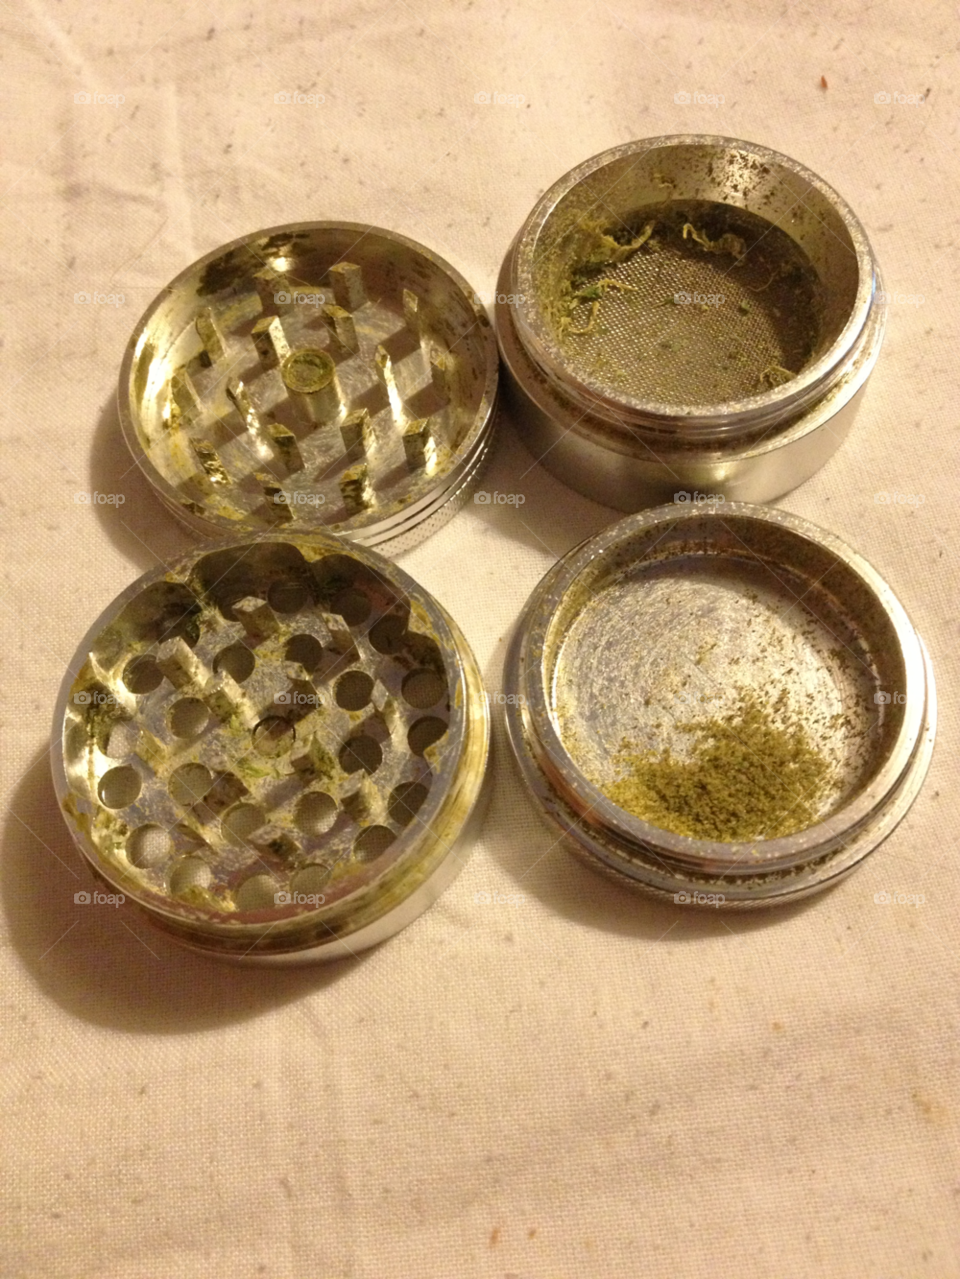 my cracked out room grinder thc by smoap